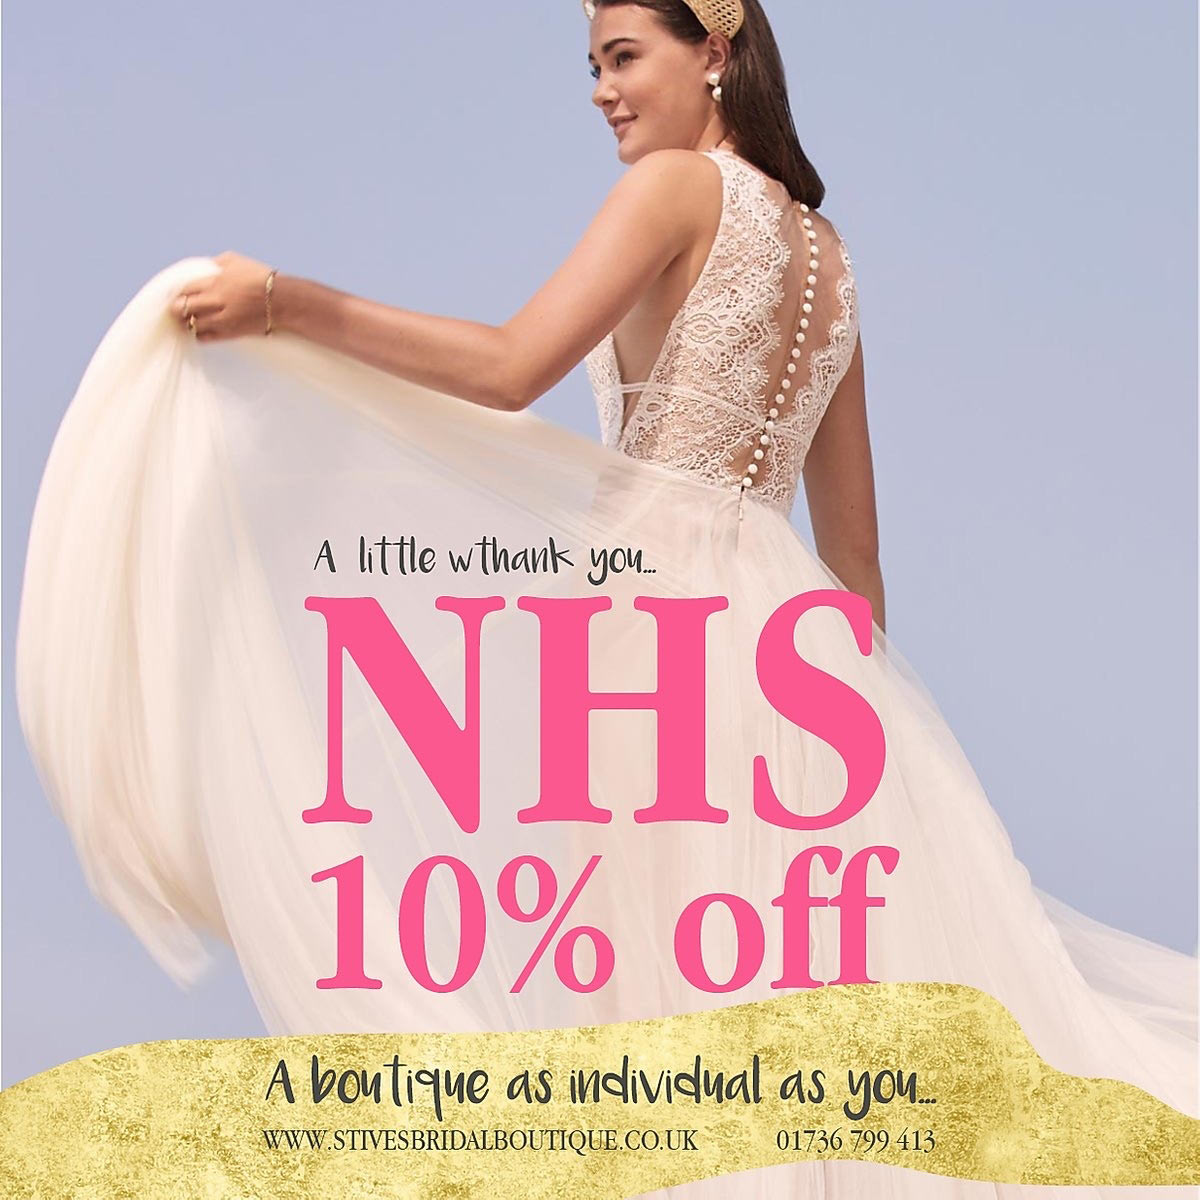 10% off orders for NHS staff from St Ives Bridal Boutique